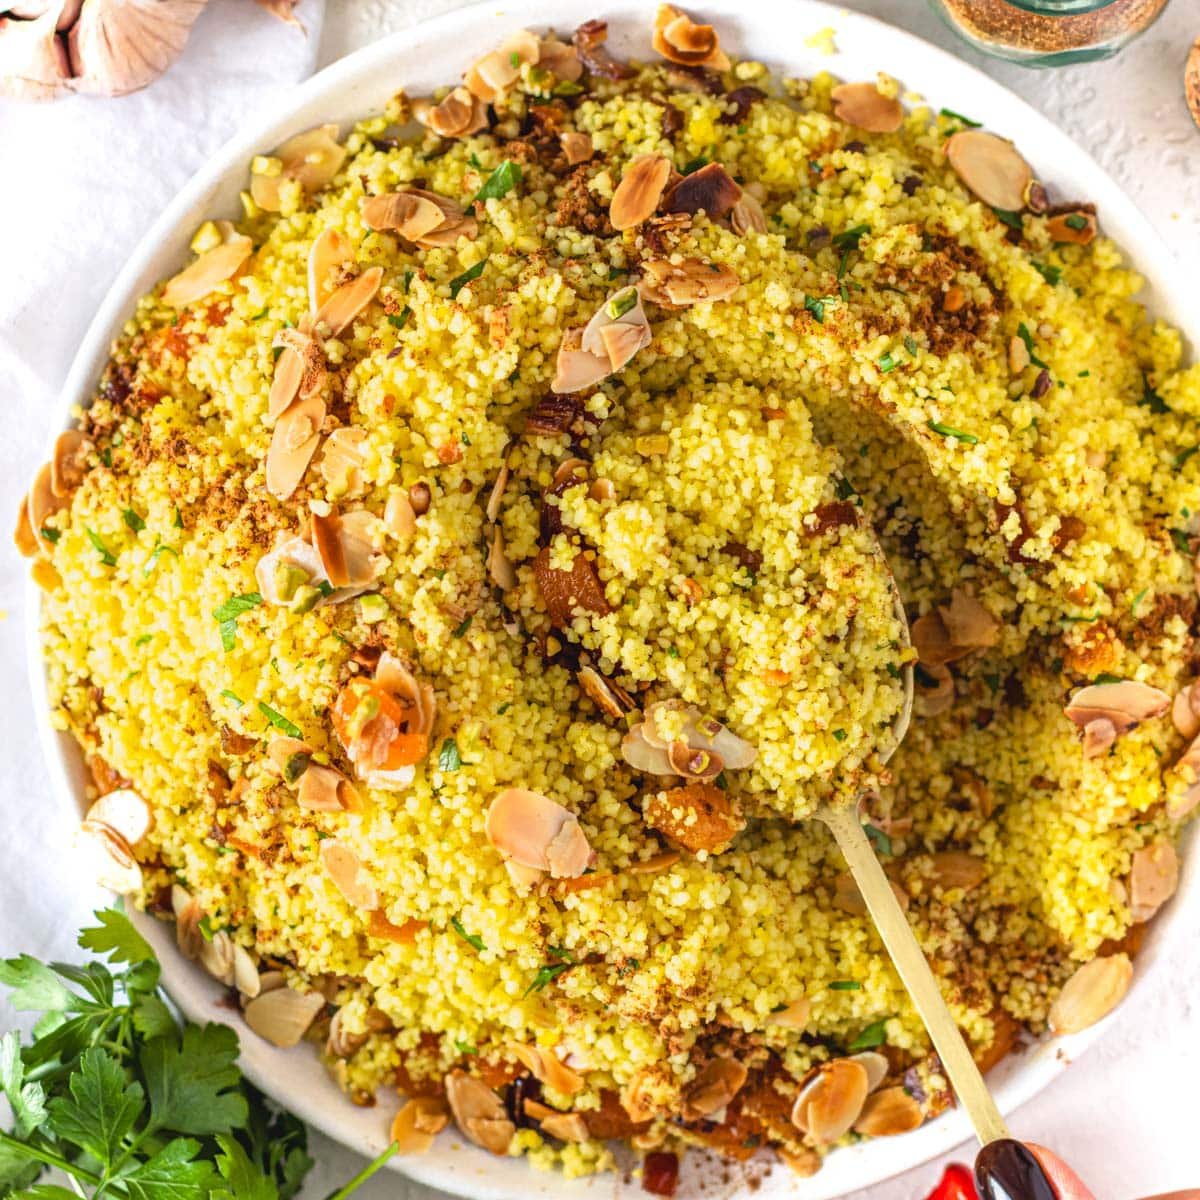 Moroccan couscous piled on a plate